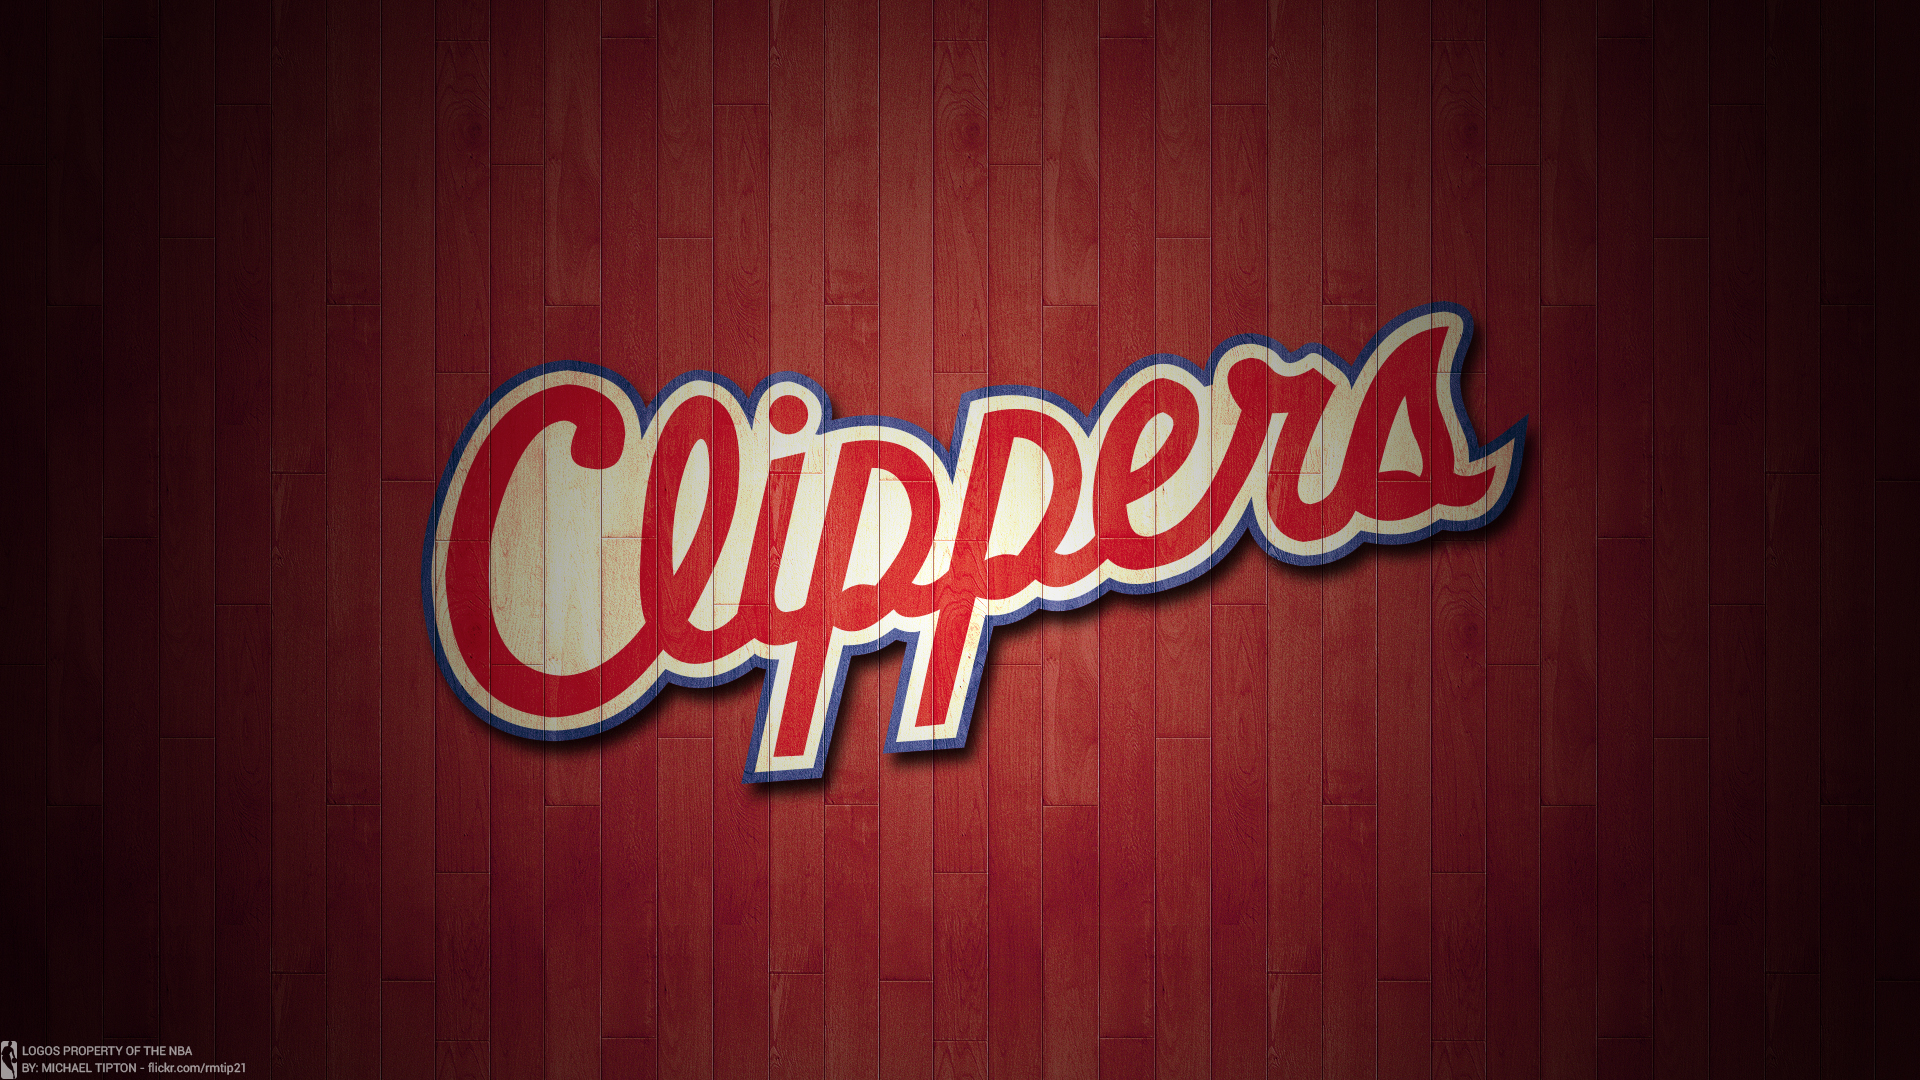 LOS ANGELES CLIPPERS basketball nba 37 wallpaper background